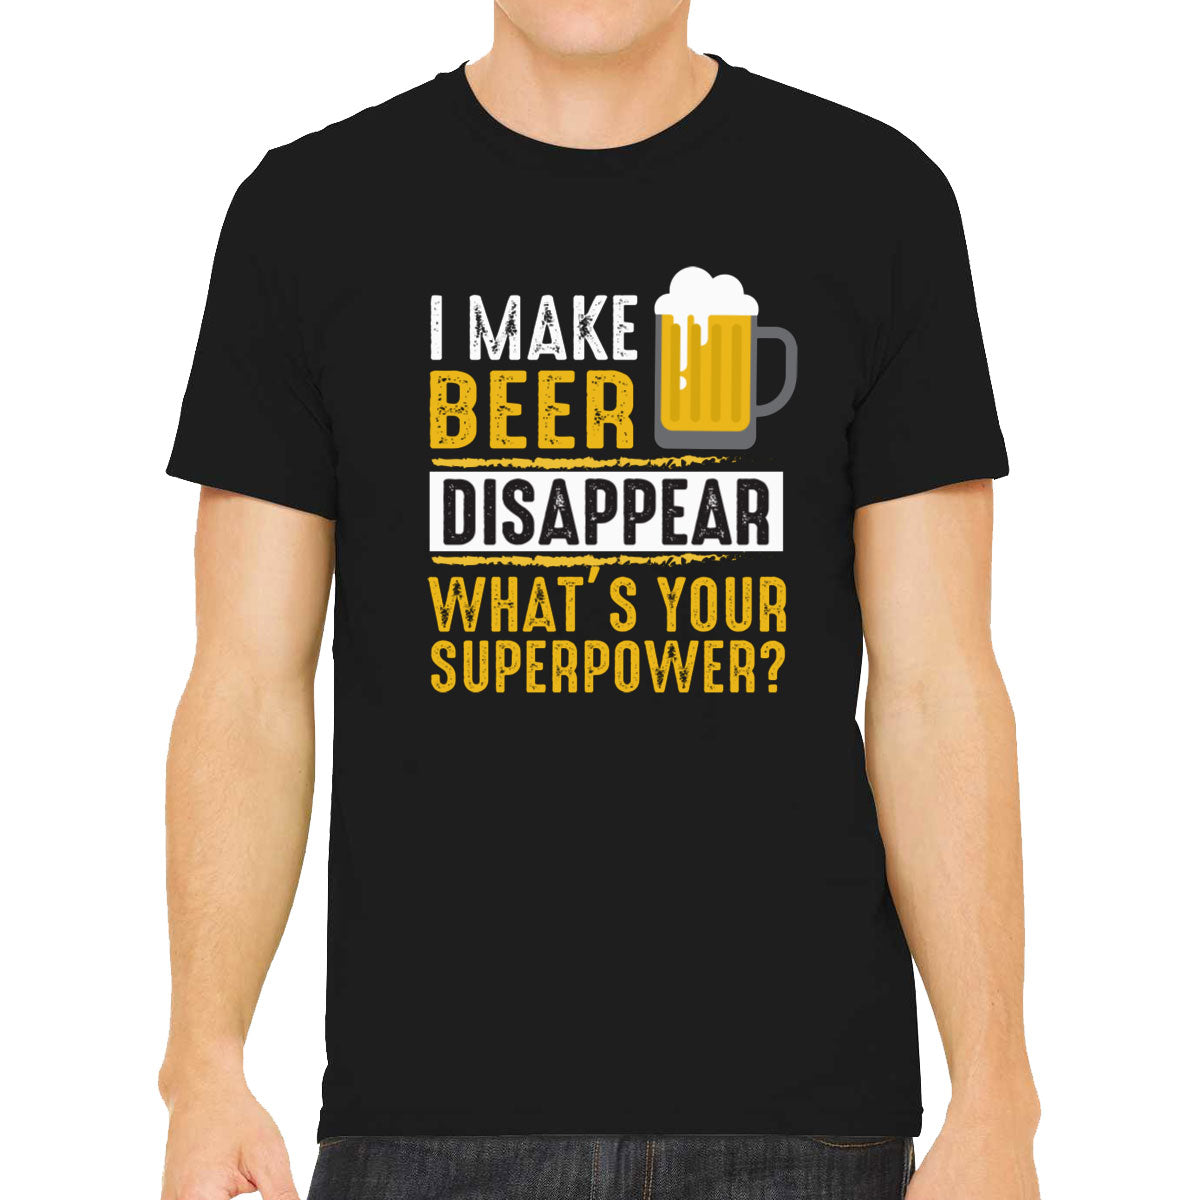 I Make Beer Disappear What's Your Superpower? Men's T-shirt